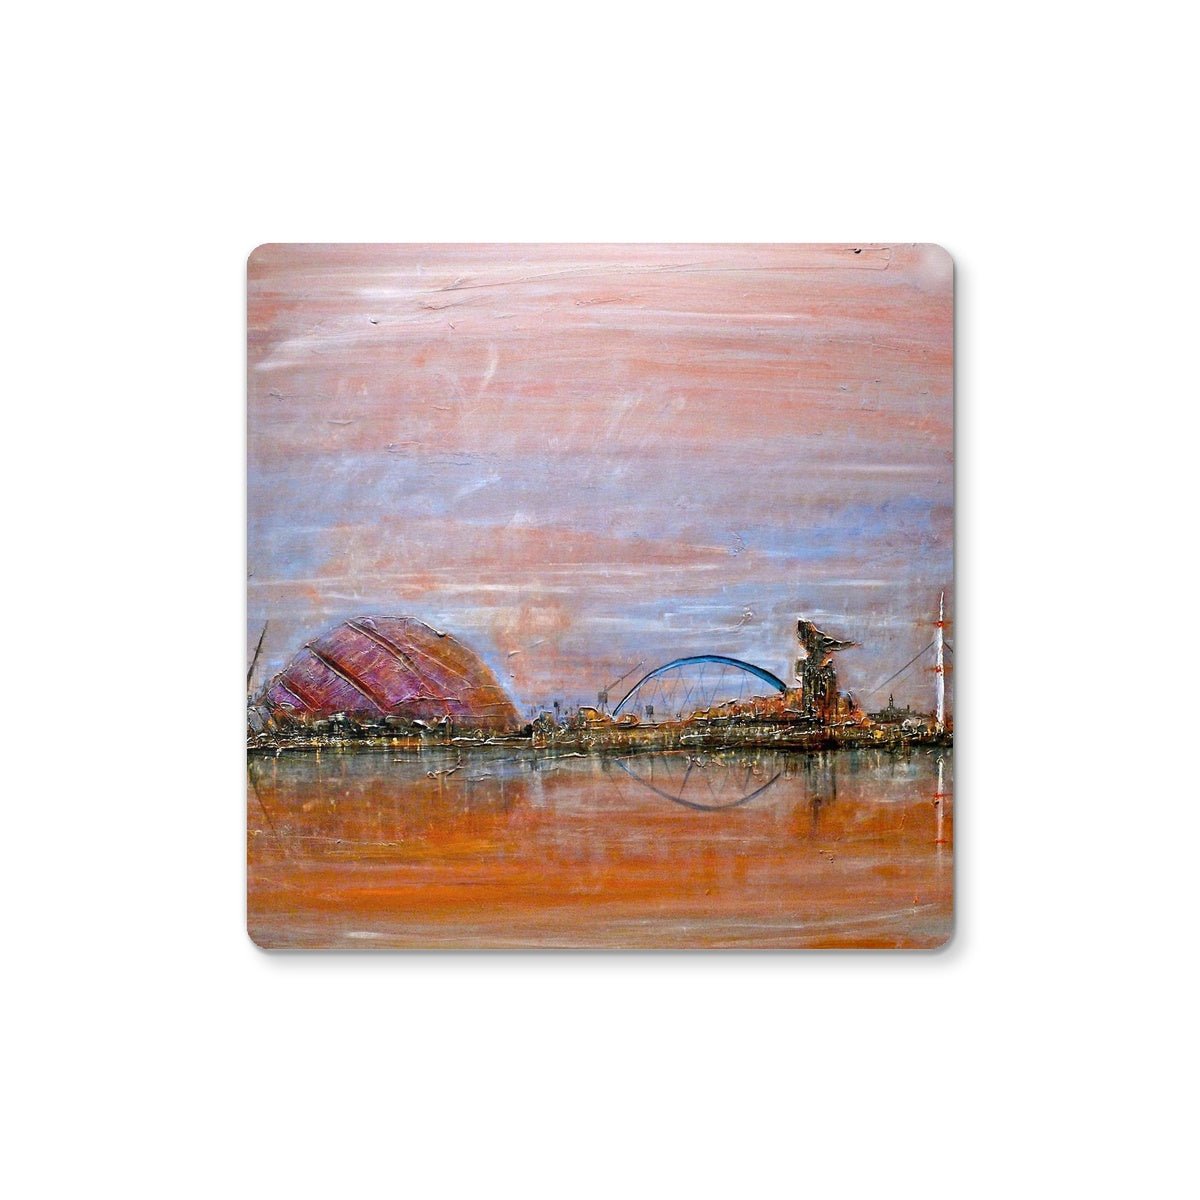 Glasgow Harbour Art Gifts Coaster-Coasters-Edinburgh & Glasgow Art Gallery-4 Coasters-Paintings, Prints, Homeware, Art Gifts From Scotland By Scottish Artist Kevin Hunter